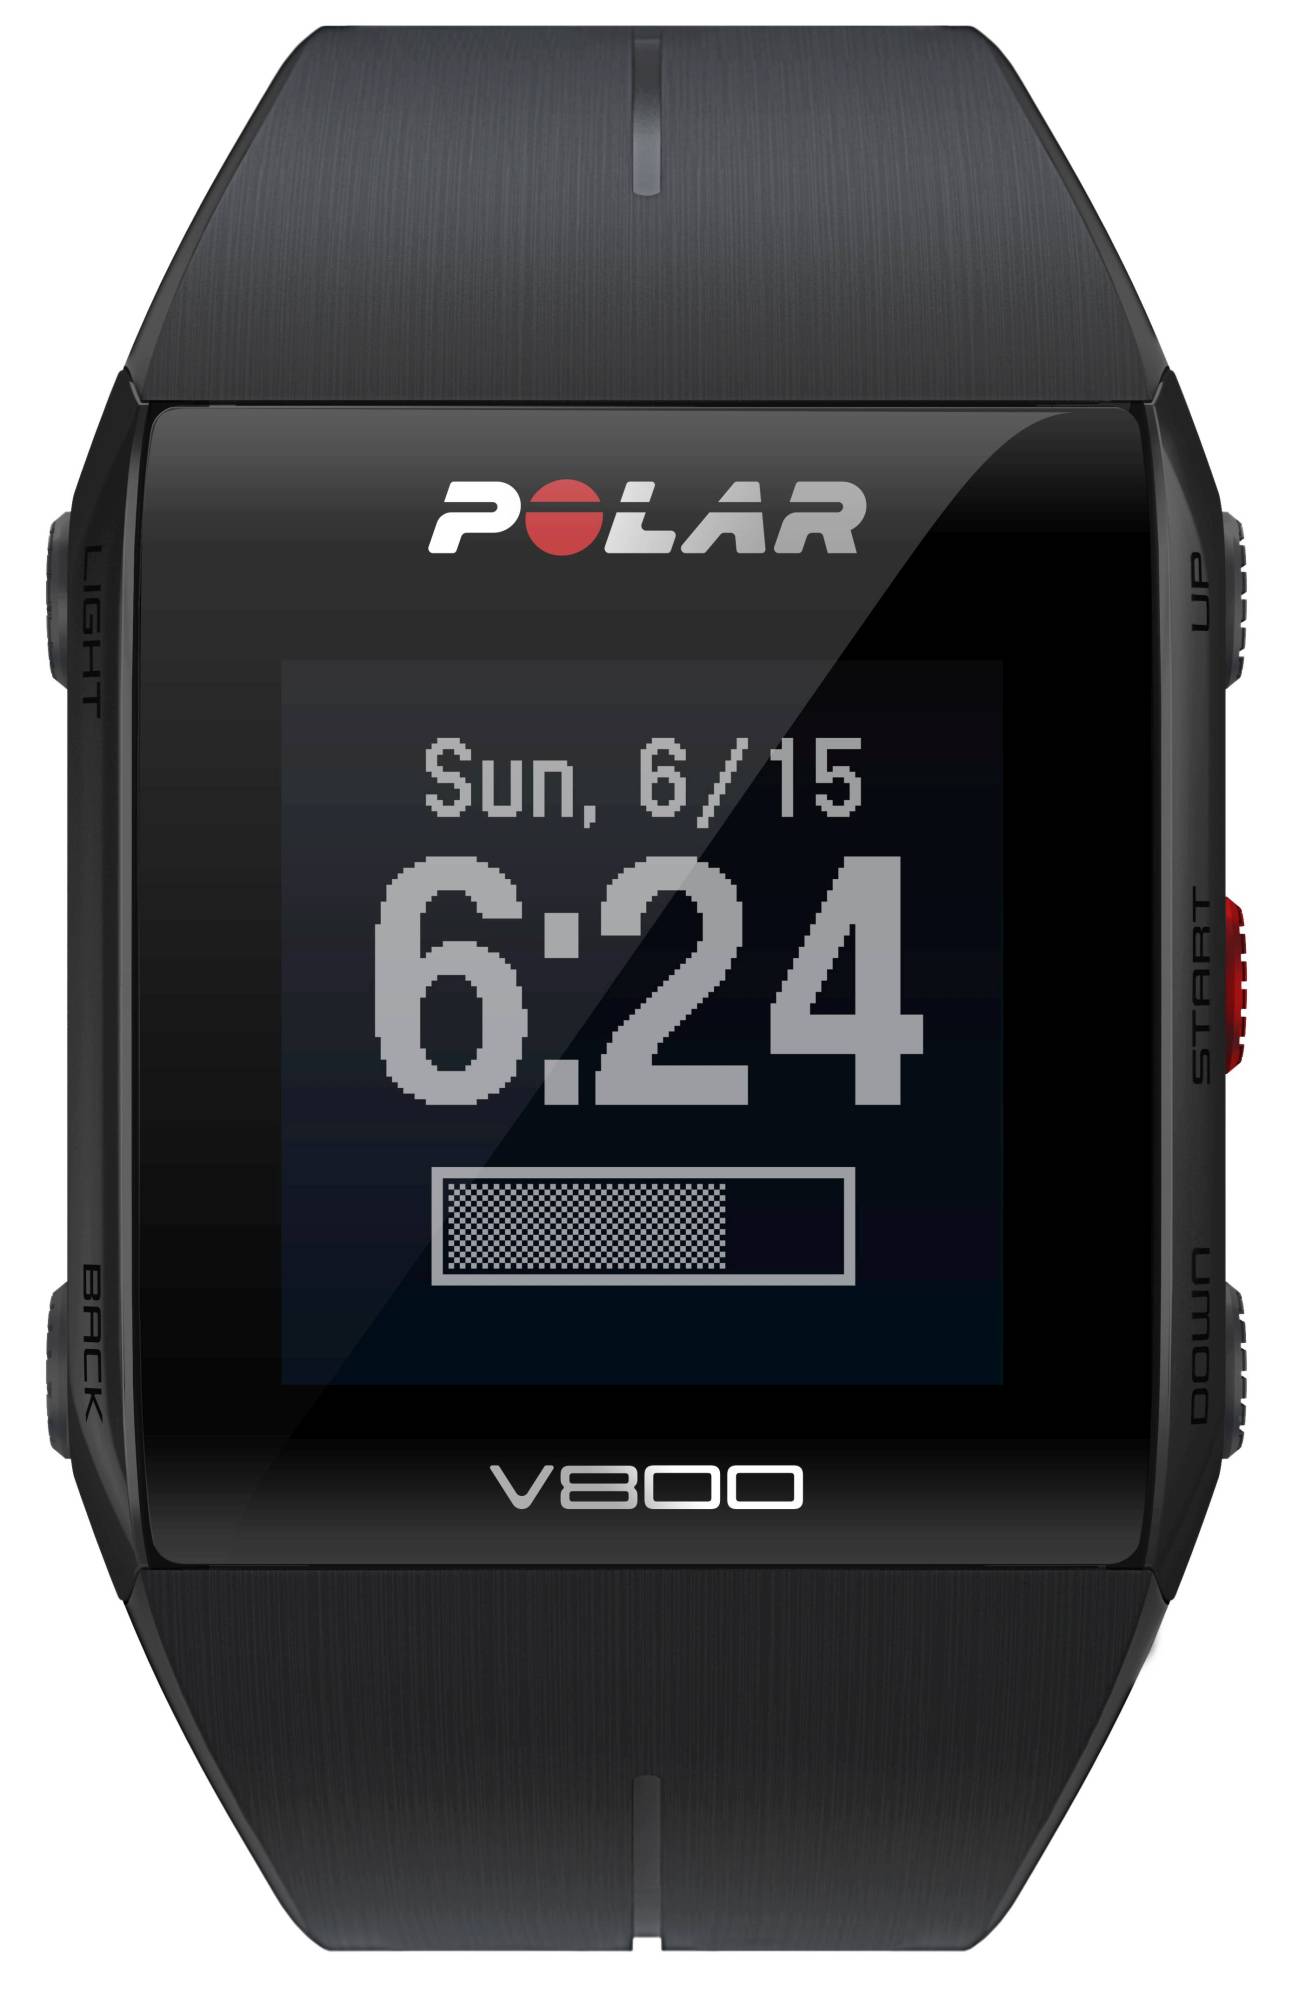 Sports watch with GPS